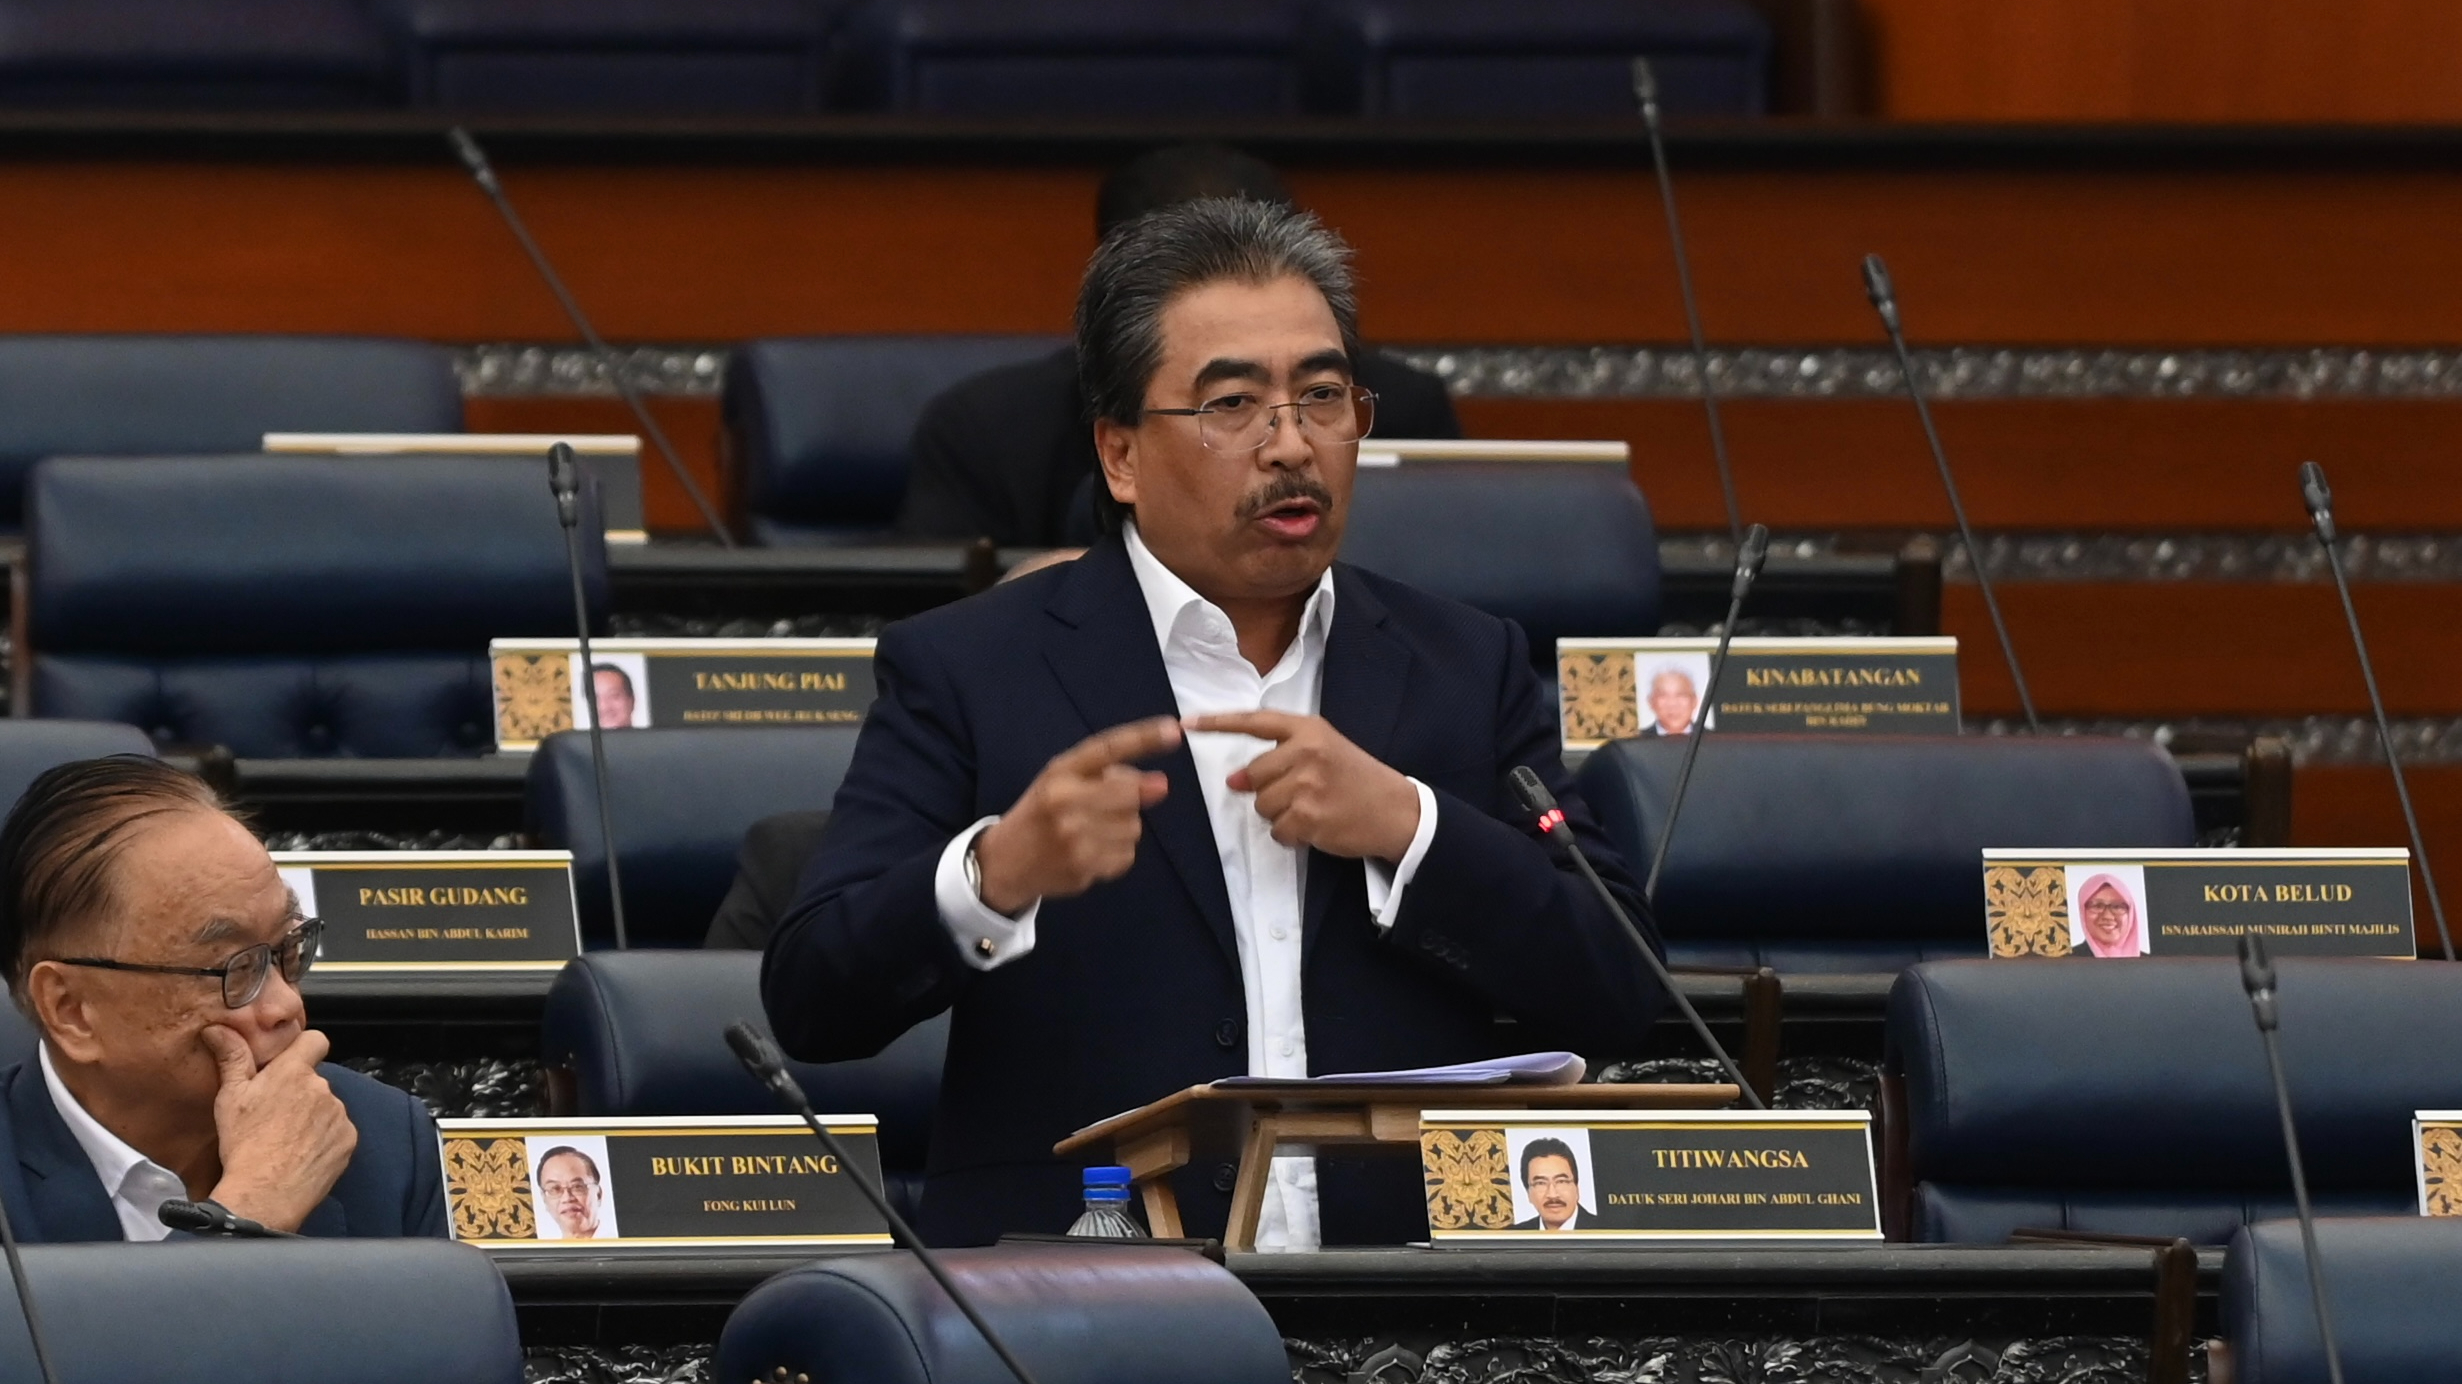 Up to PM to decide who serves in his cabinet: Johari Ghani